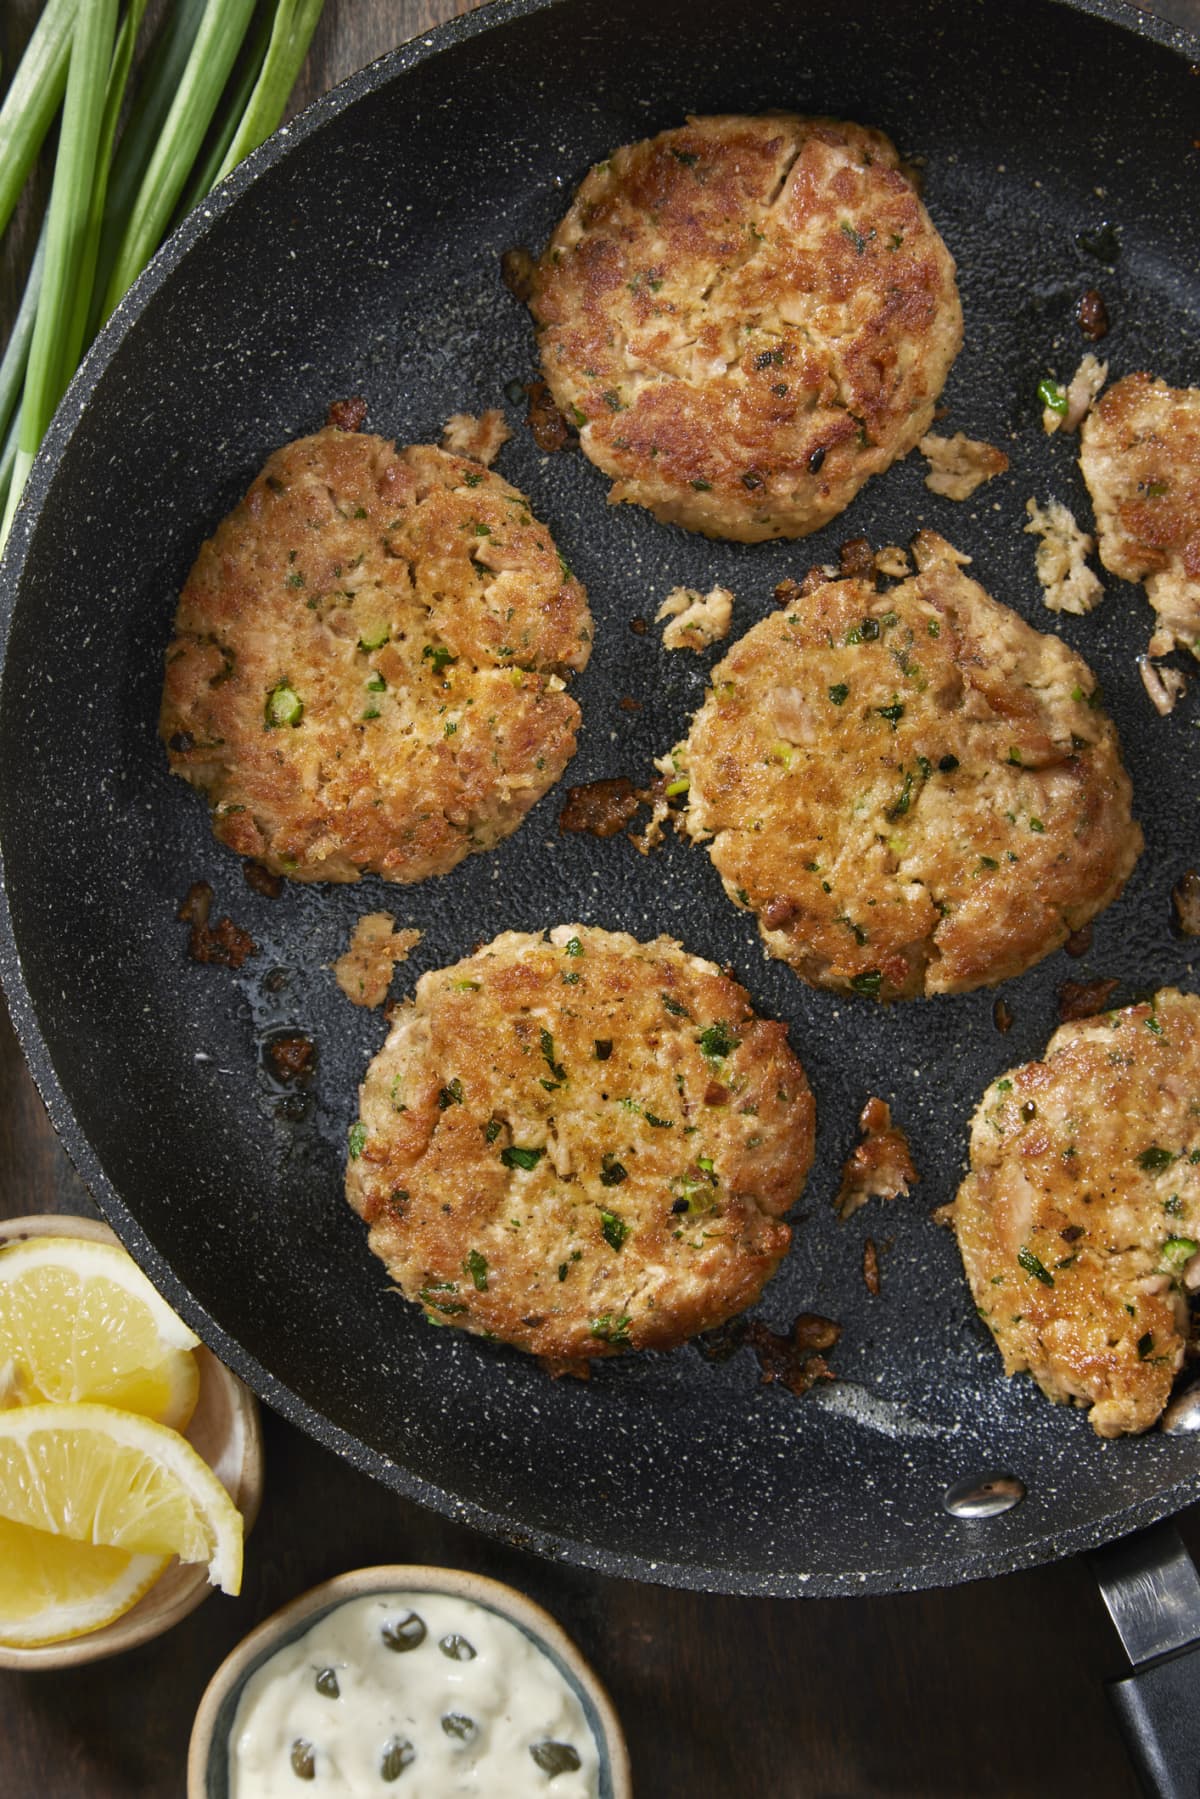 Homemade fish burger patties cooking in a pan